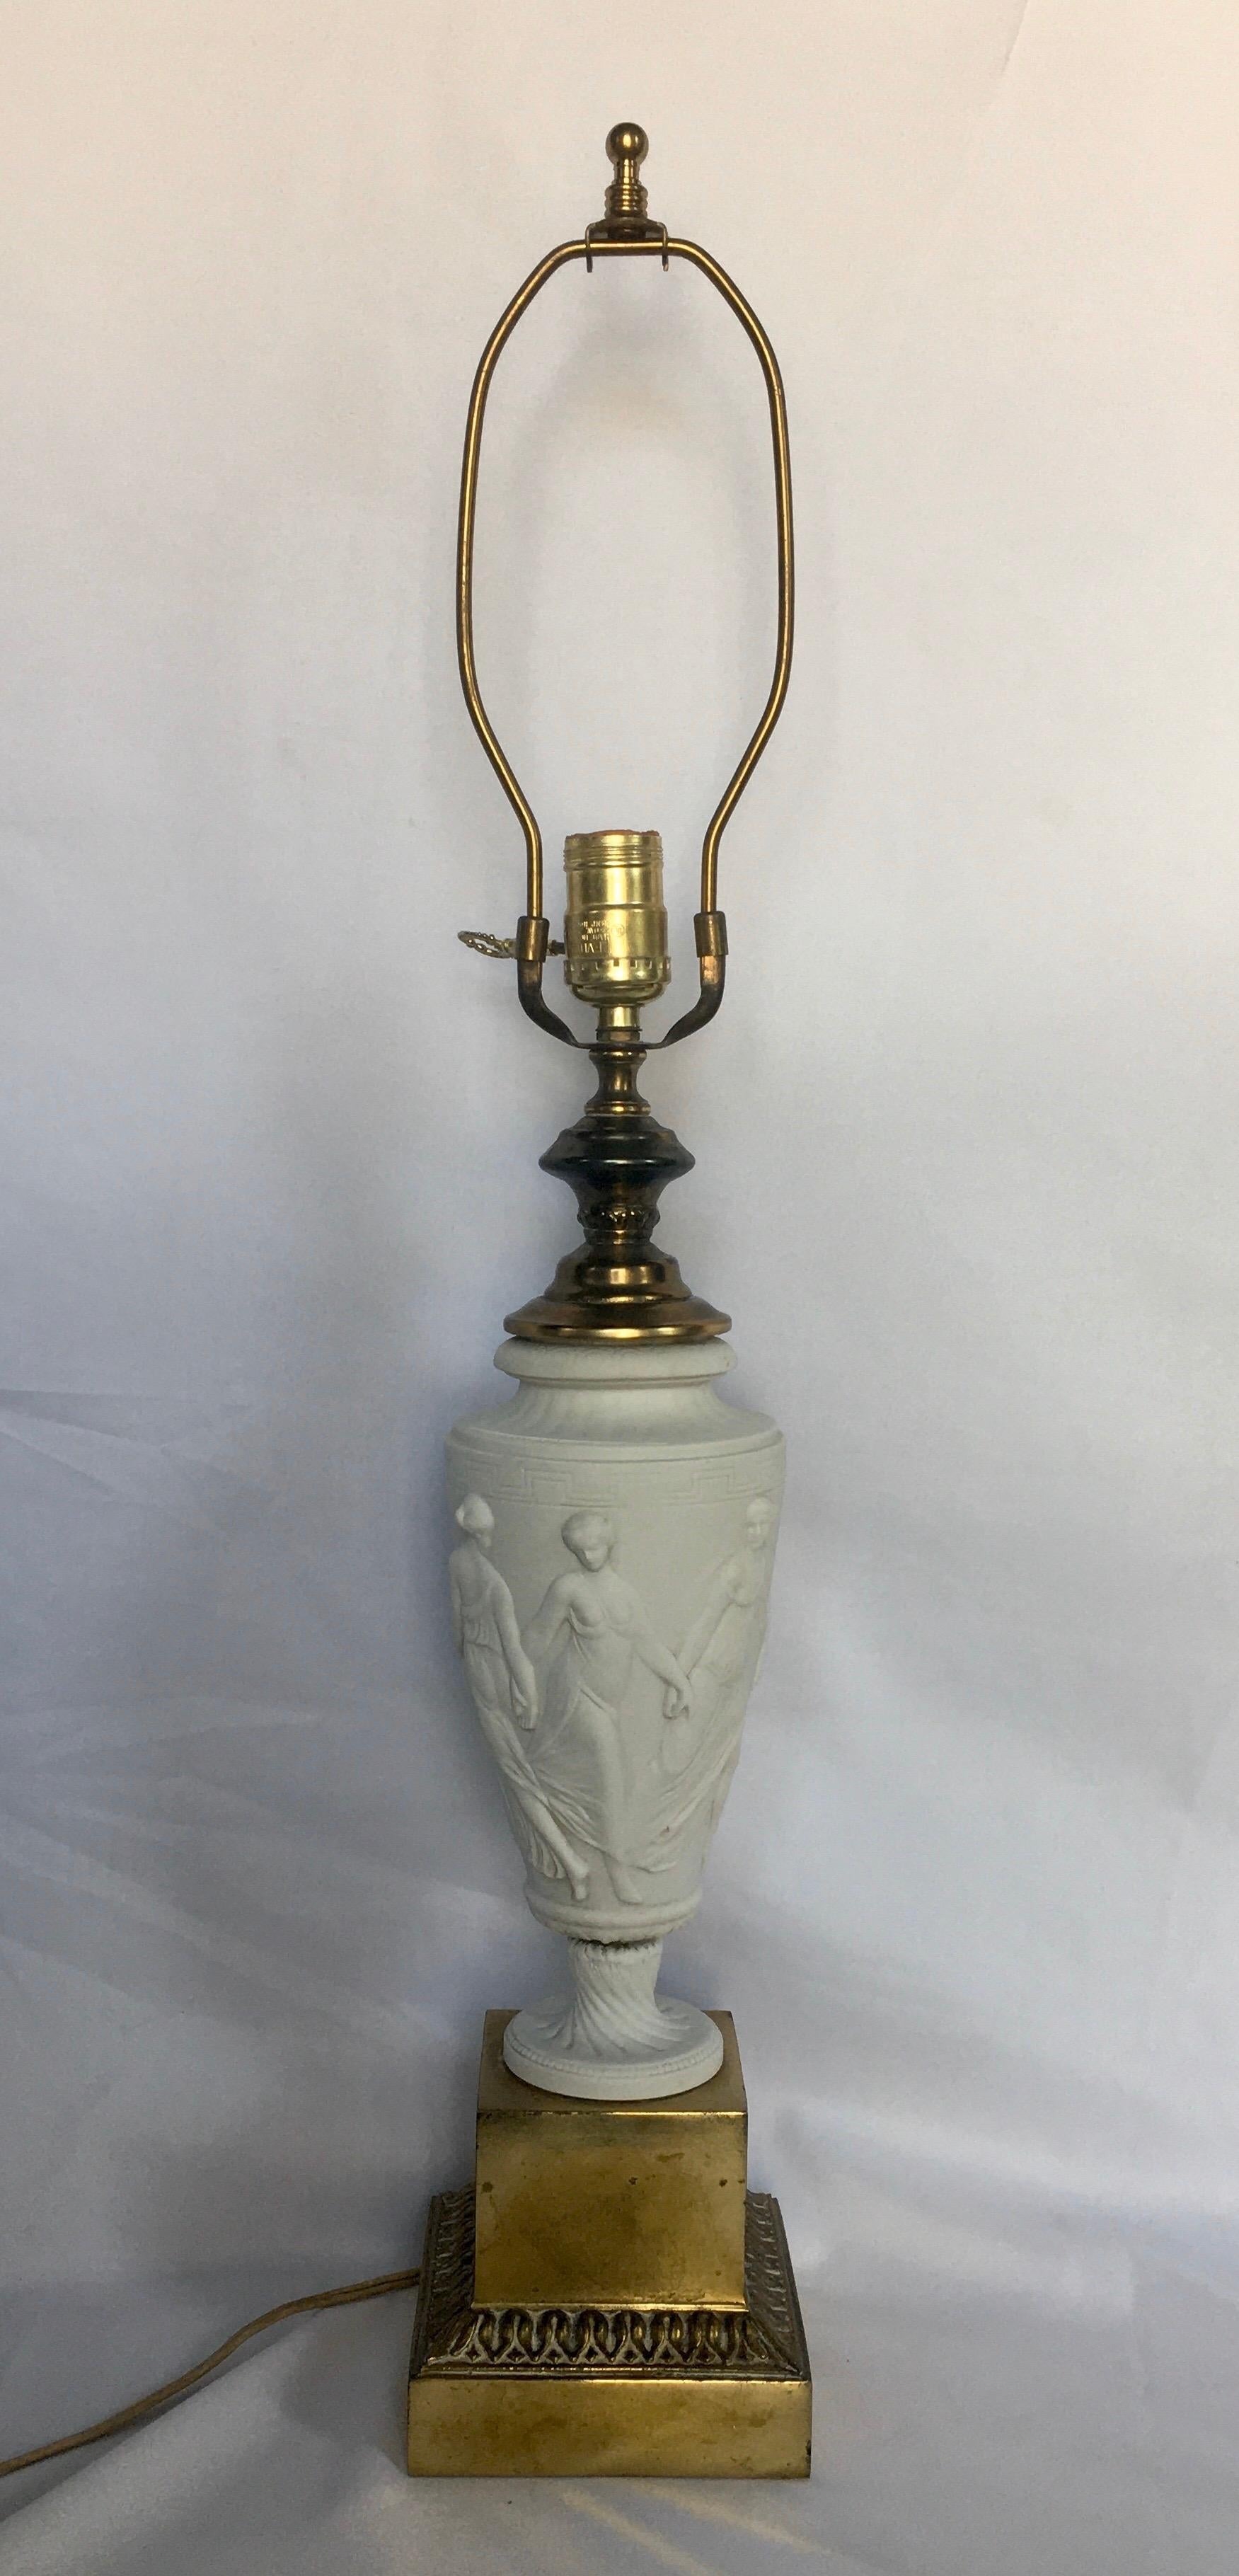 Neoclassical style matte white bisque porcelain table lamp made in Bulgaria, Germany. This Classic urn shaped lamp is mounted on a brass plinth base and features dimensional figures and Greek key motifs. Marked 